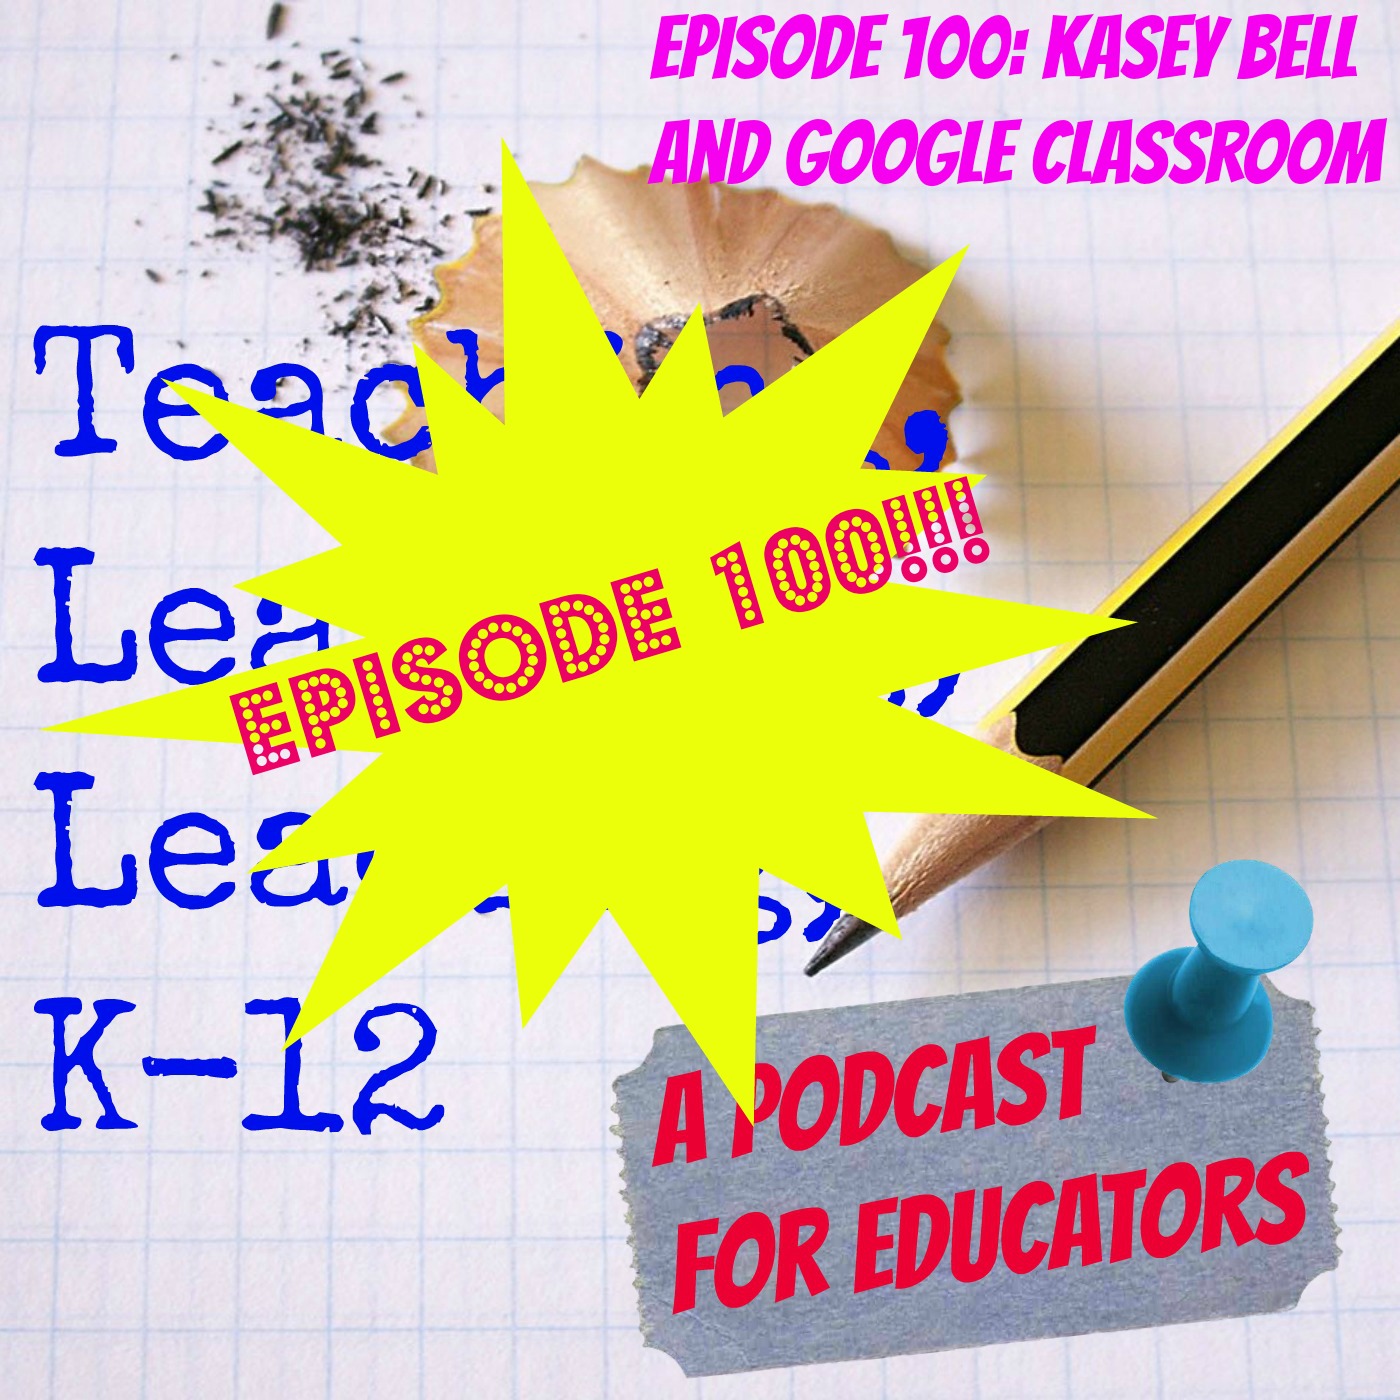 Episode 100: Kasey Bell and Google Classroom